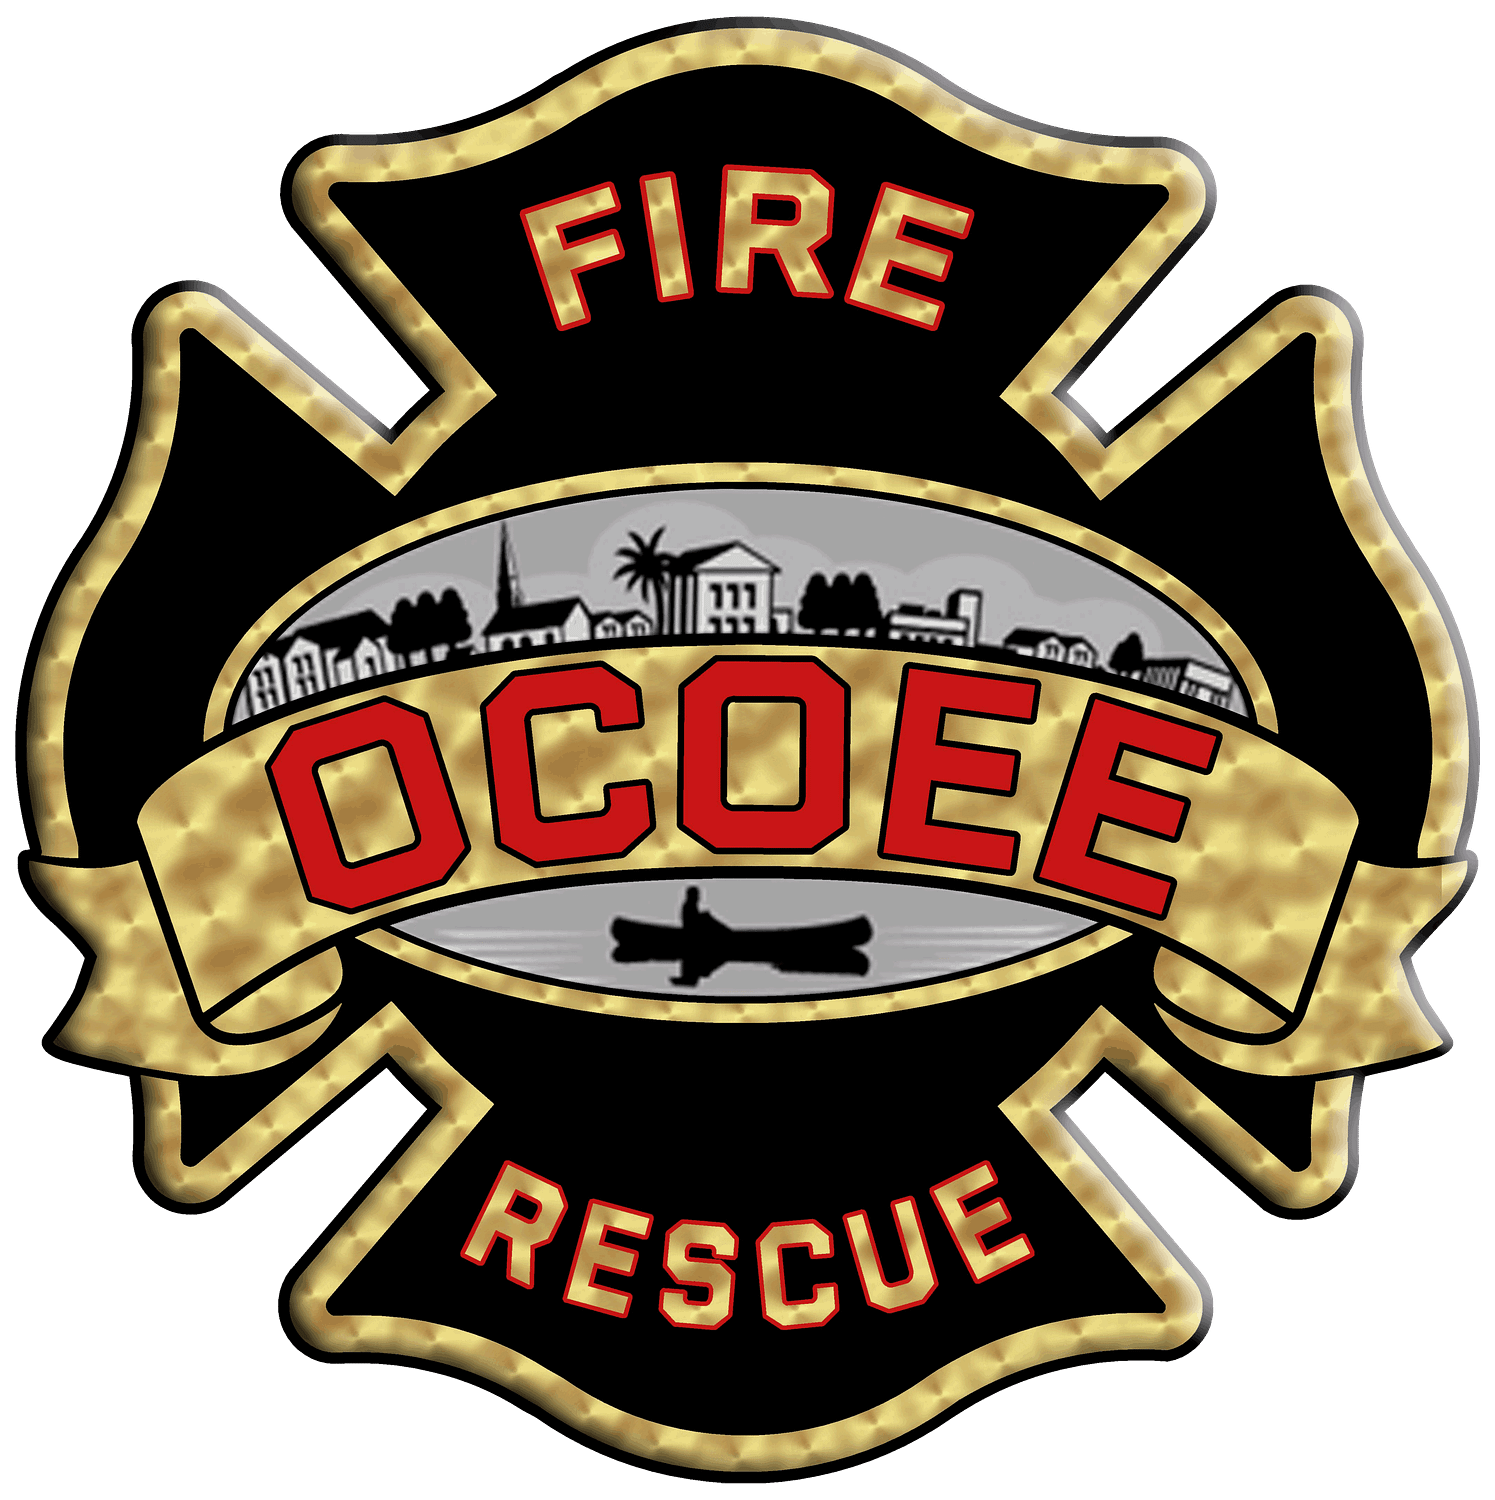 OCOEE Fire and Rescue logo in gold, black, red and gray